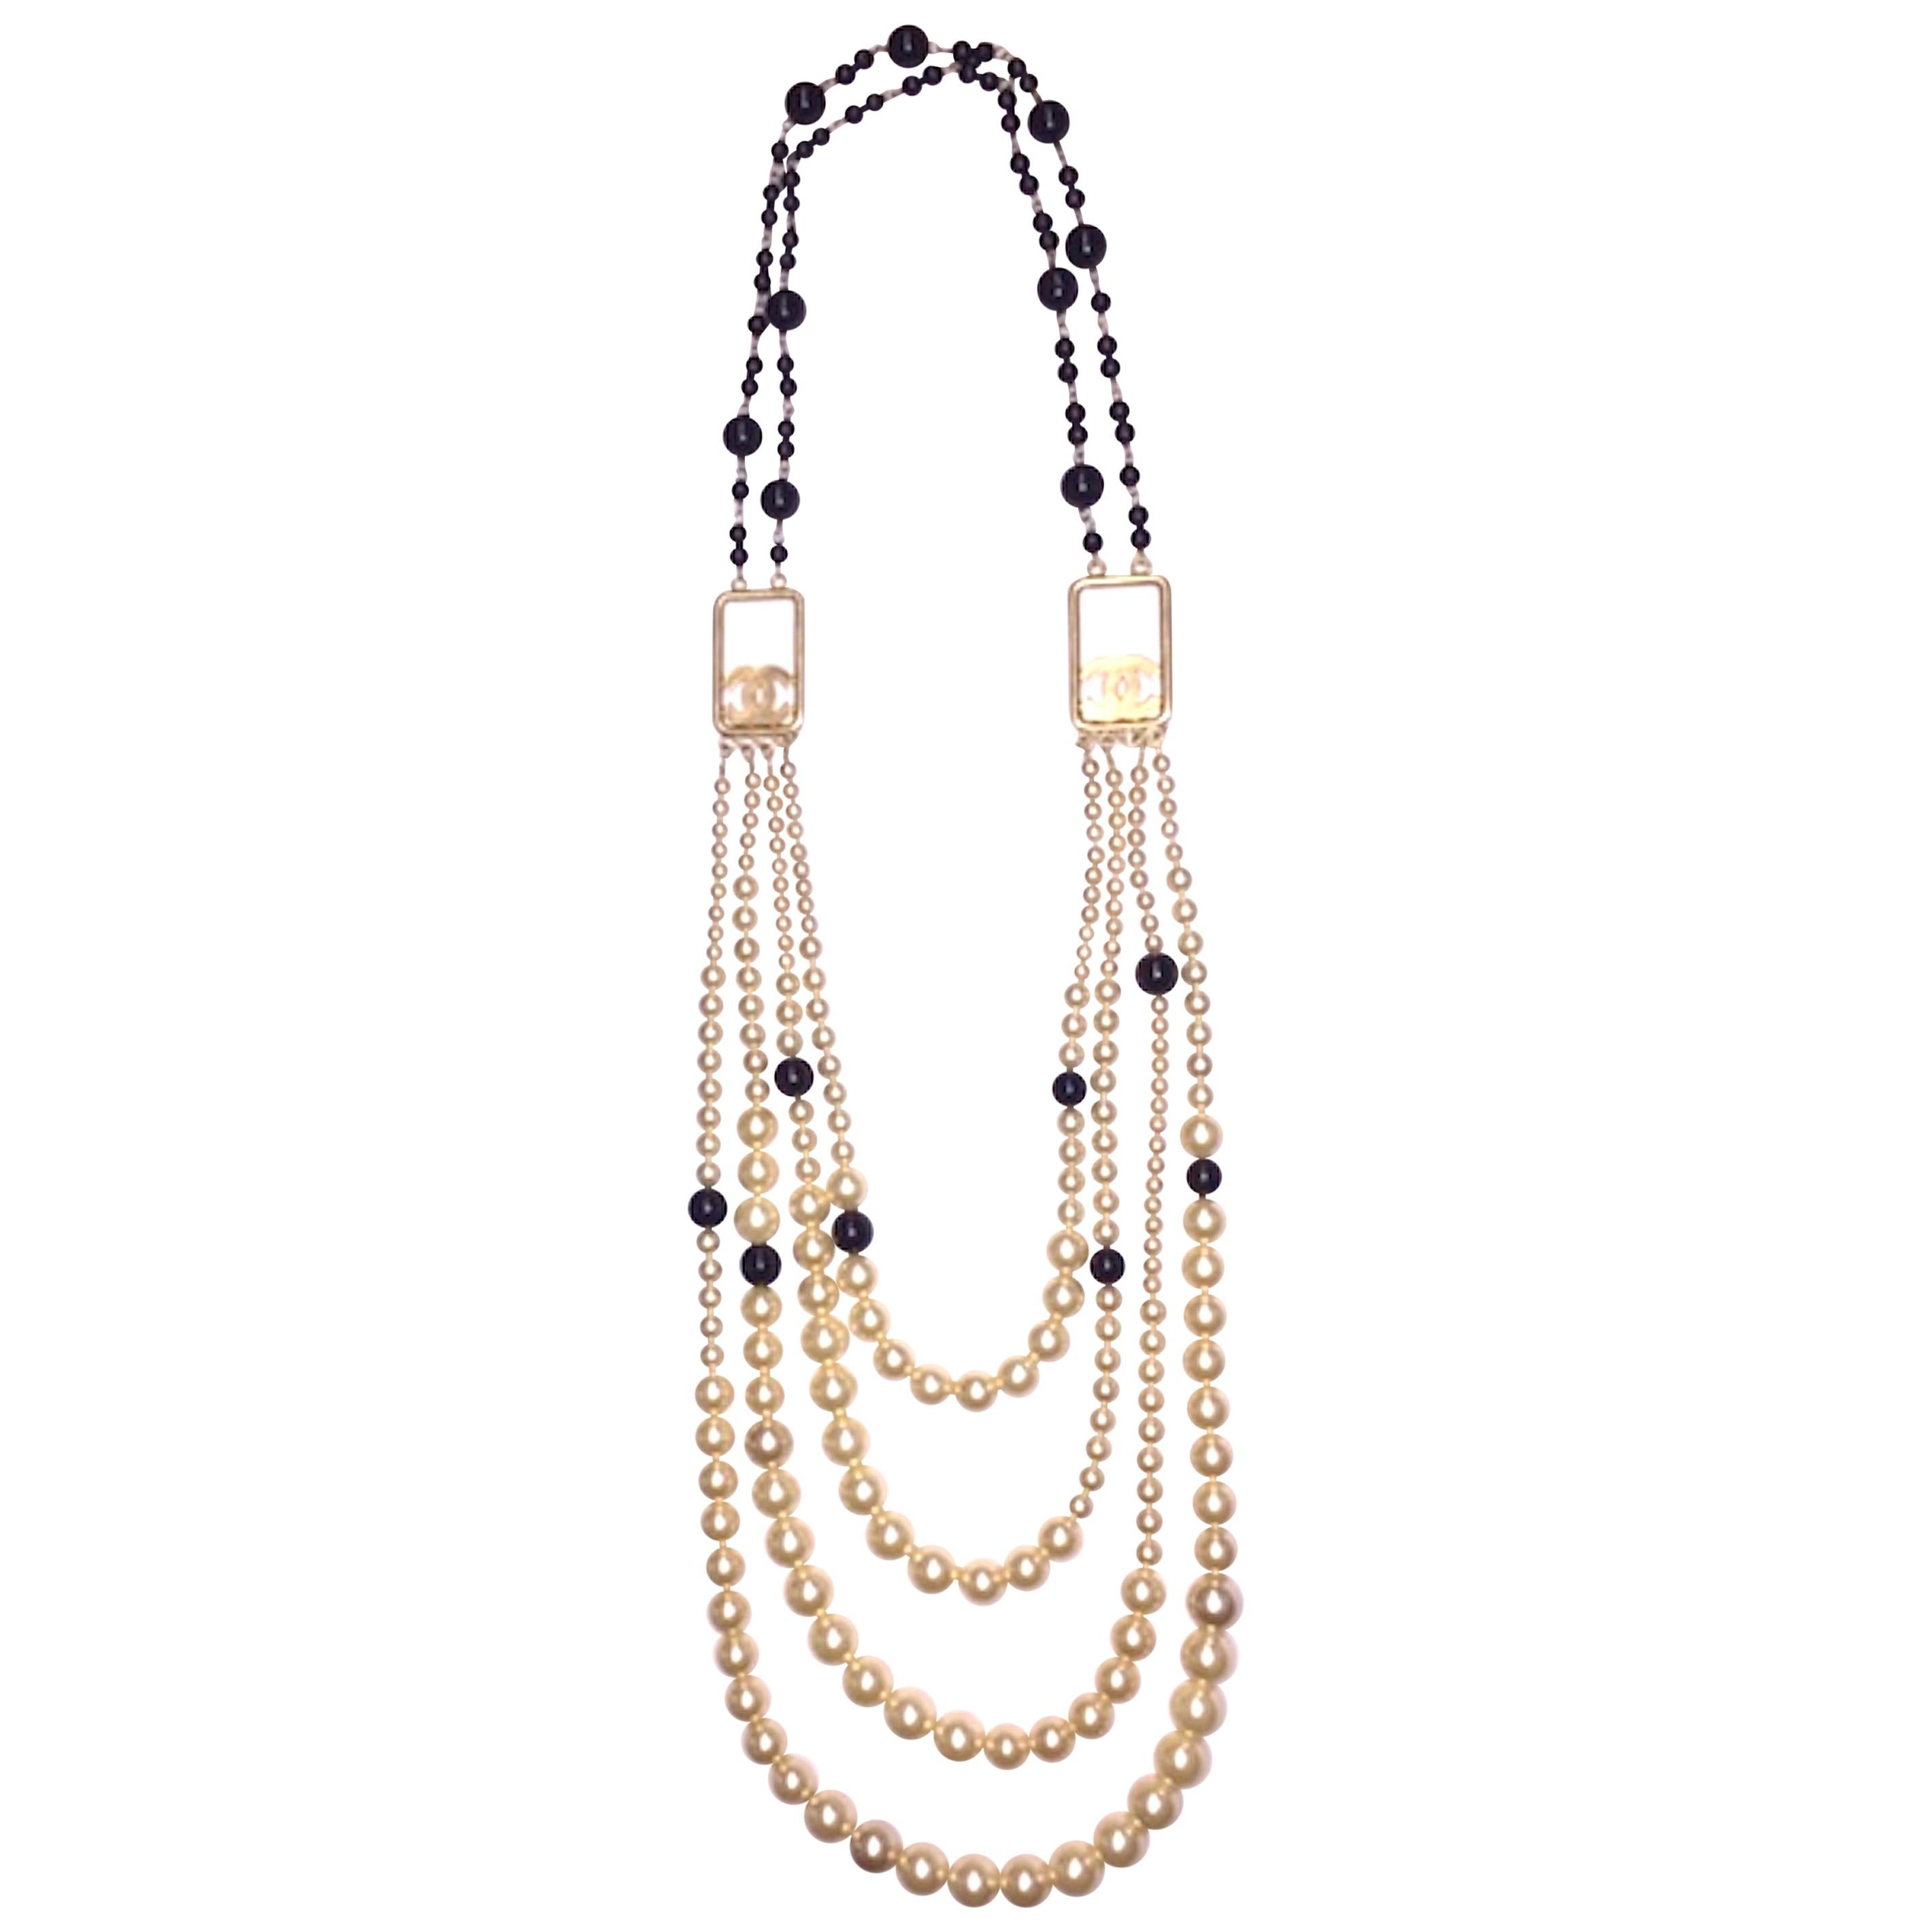 Chanel Graduated 4 Strand Pearl & Black Bead Necklace, Spring 2003 Collection